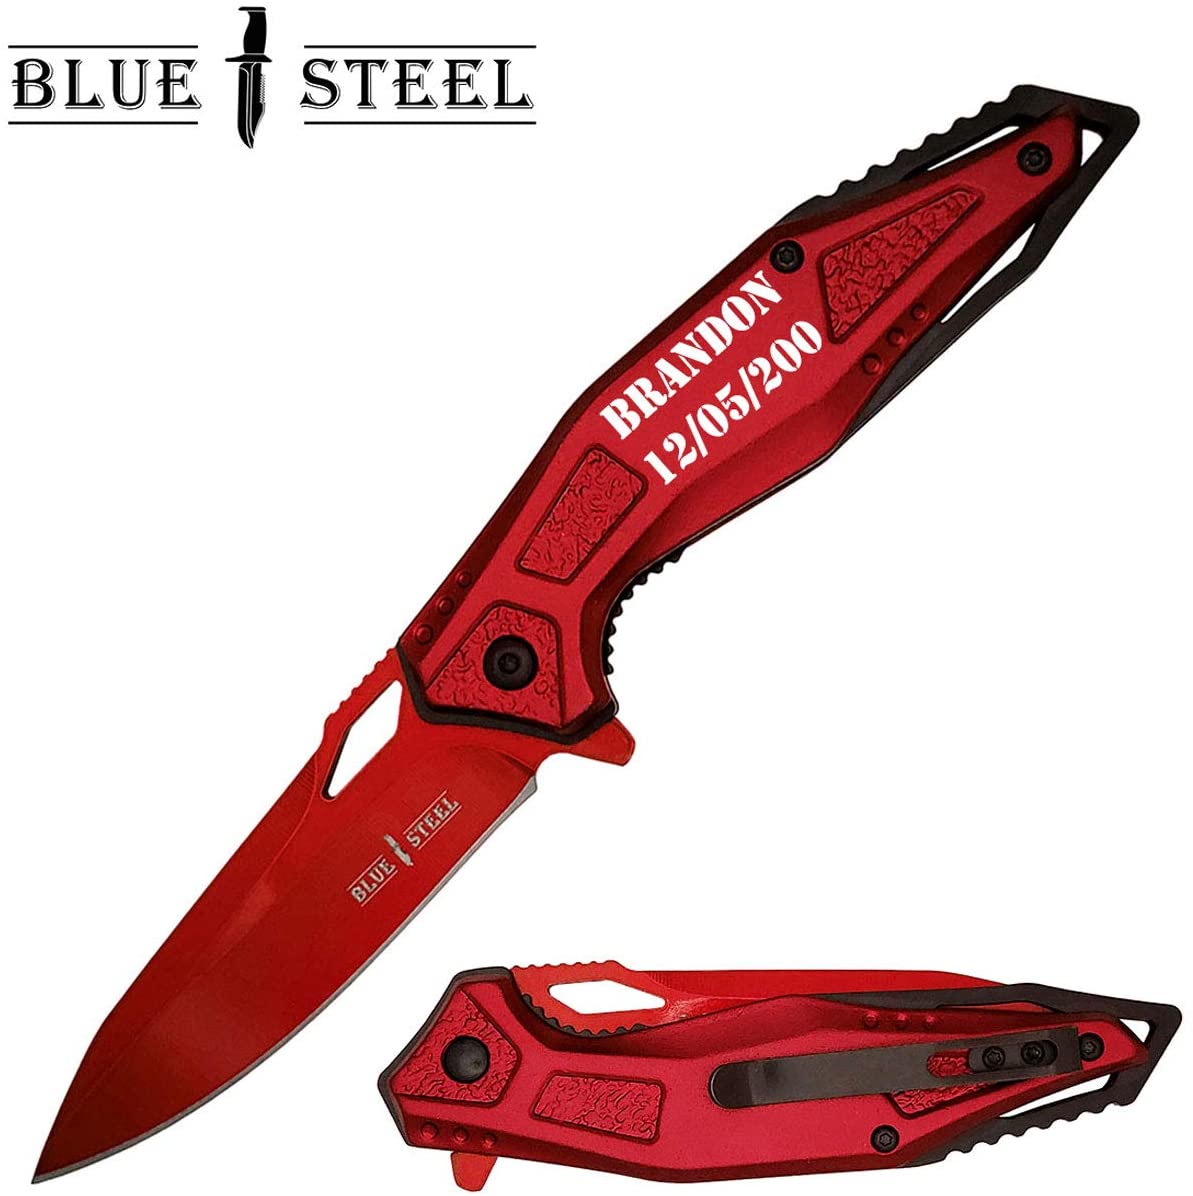 GIFTS INFINITY Stainless Steel Folding Knife with Red Stainless Steel Blade, Engrave Pocket Knife, Gifts for Boyfriend (BT-70RDM)